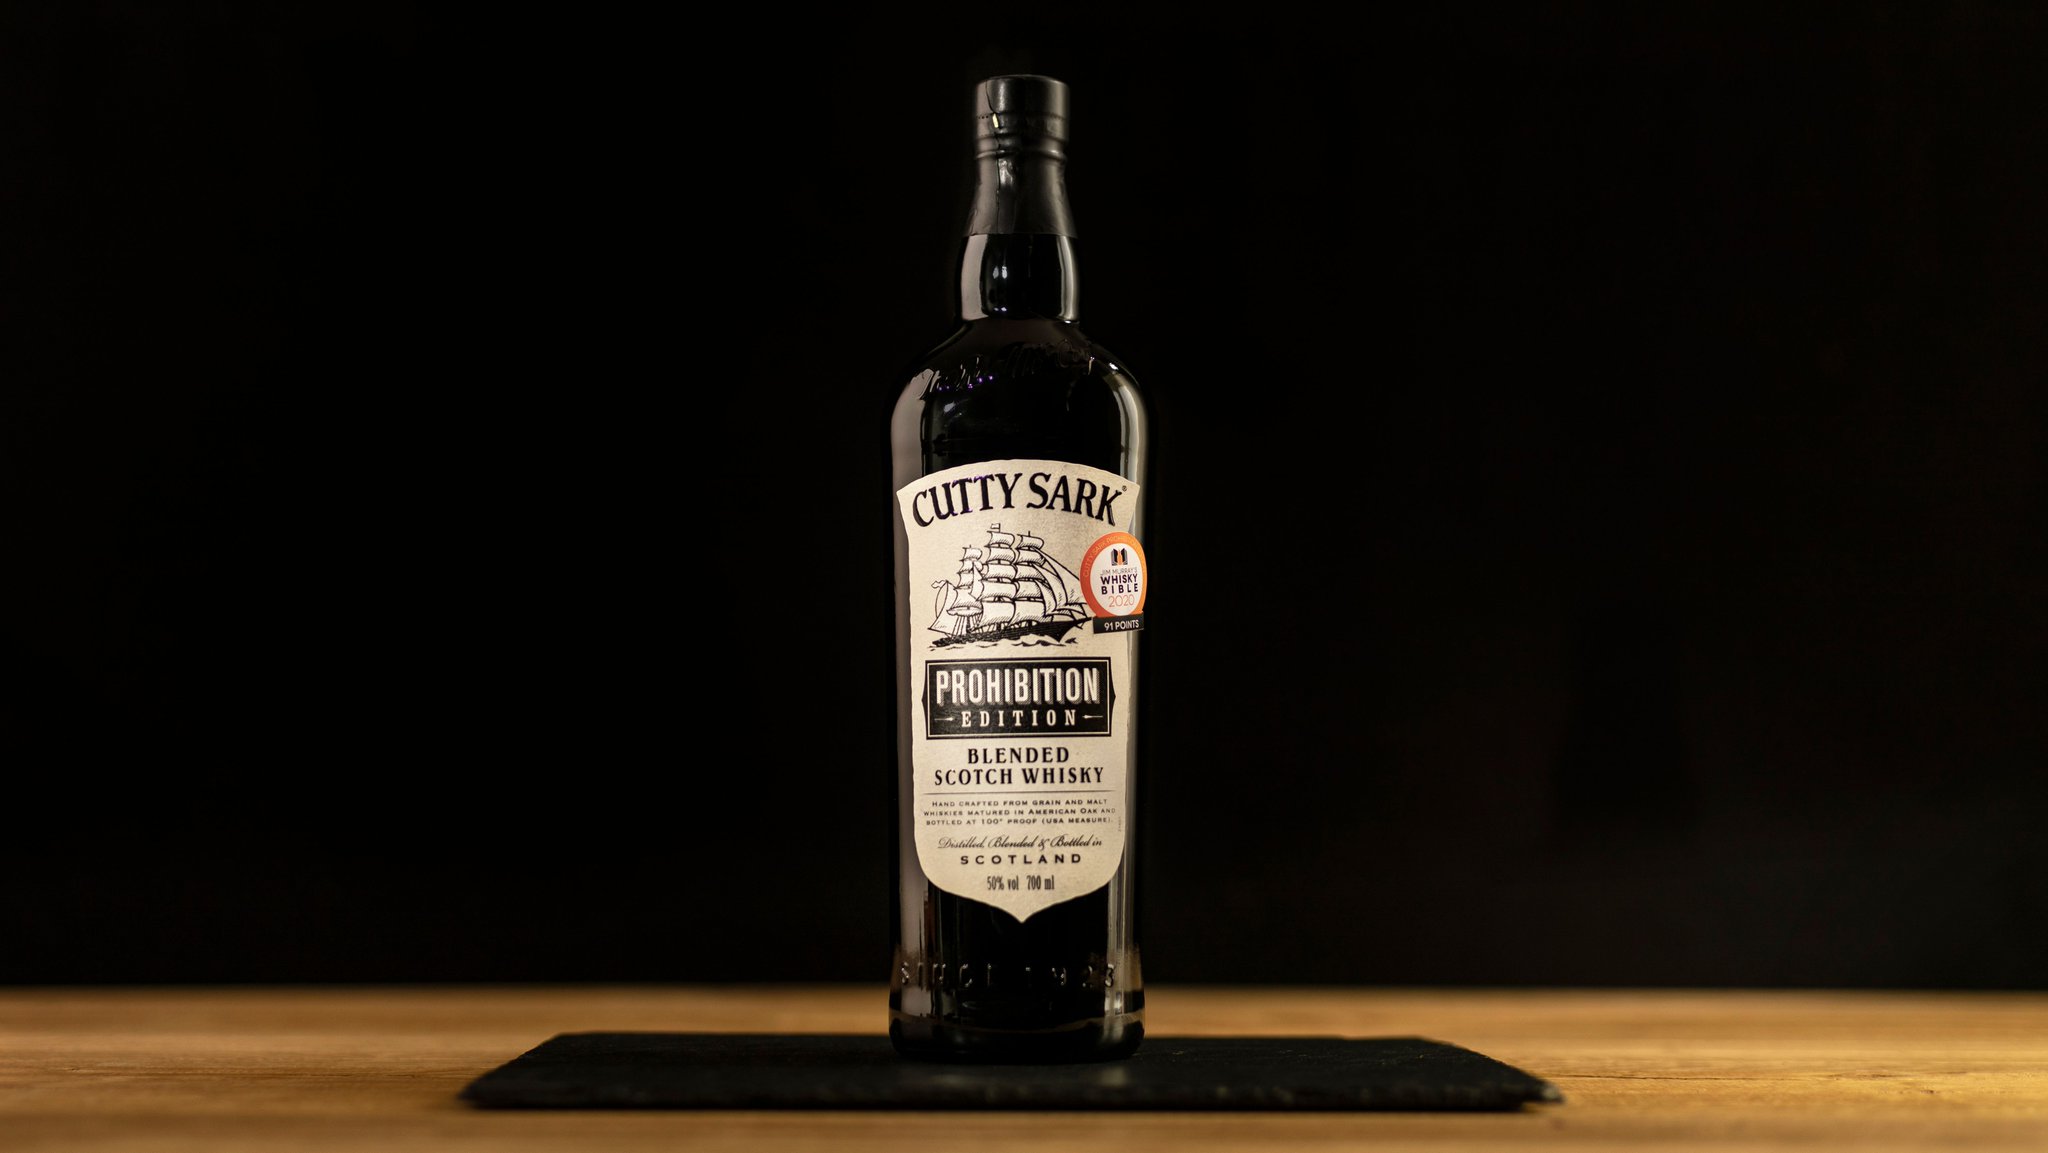 Master Of Malt Cutty Sark Prohibition Edition Was Made As A Tip Of The Hat To Famous Prohibition Era Rum Runner Captain William Mccoy Scotchwhisky T Co Nggq5xf0fj T Co Ga9te8zre2